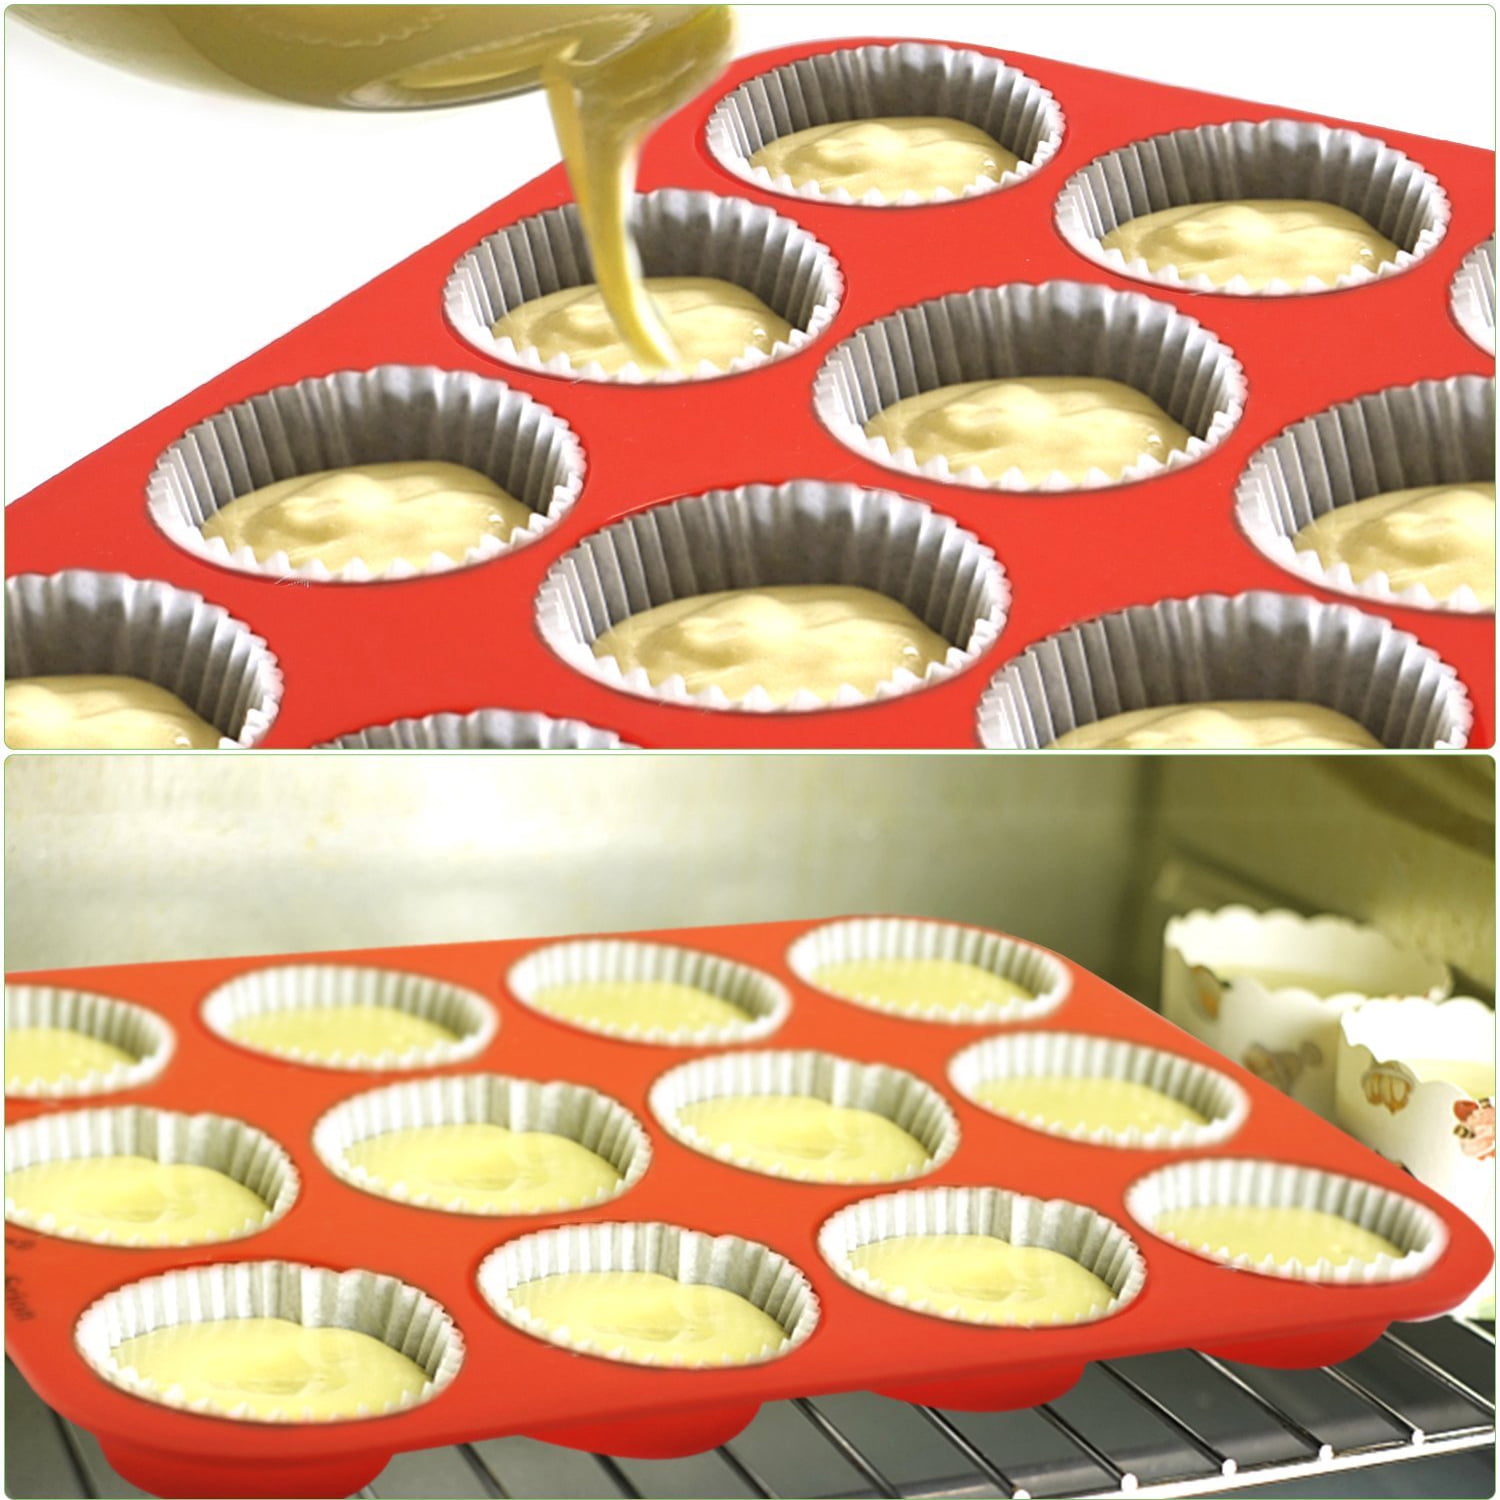 NEW KitchenAid 12 Cups Mini Muffin Nonstick Pan - Muffins Holes 2” dia By  1”